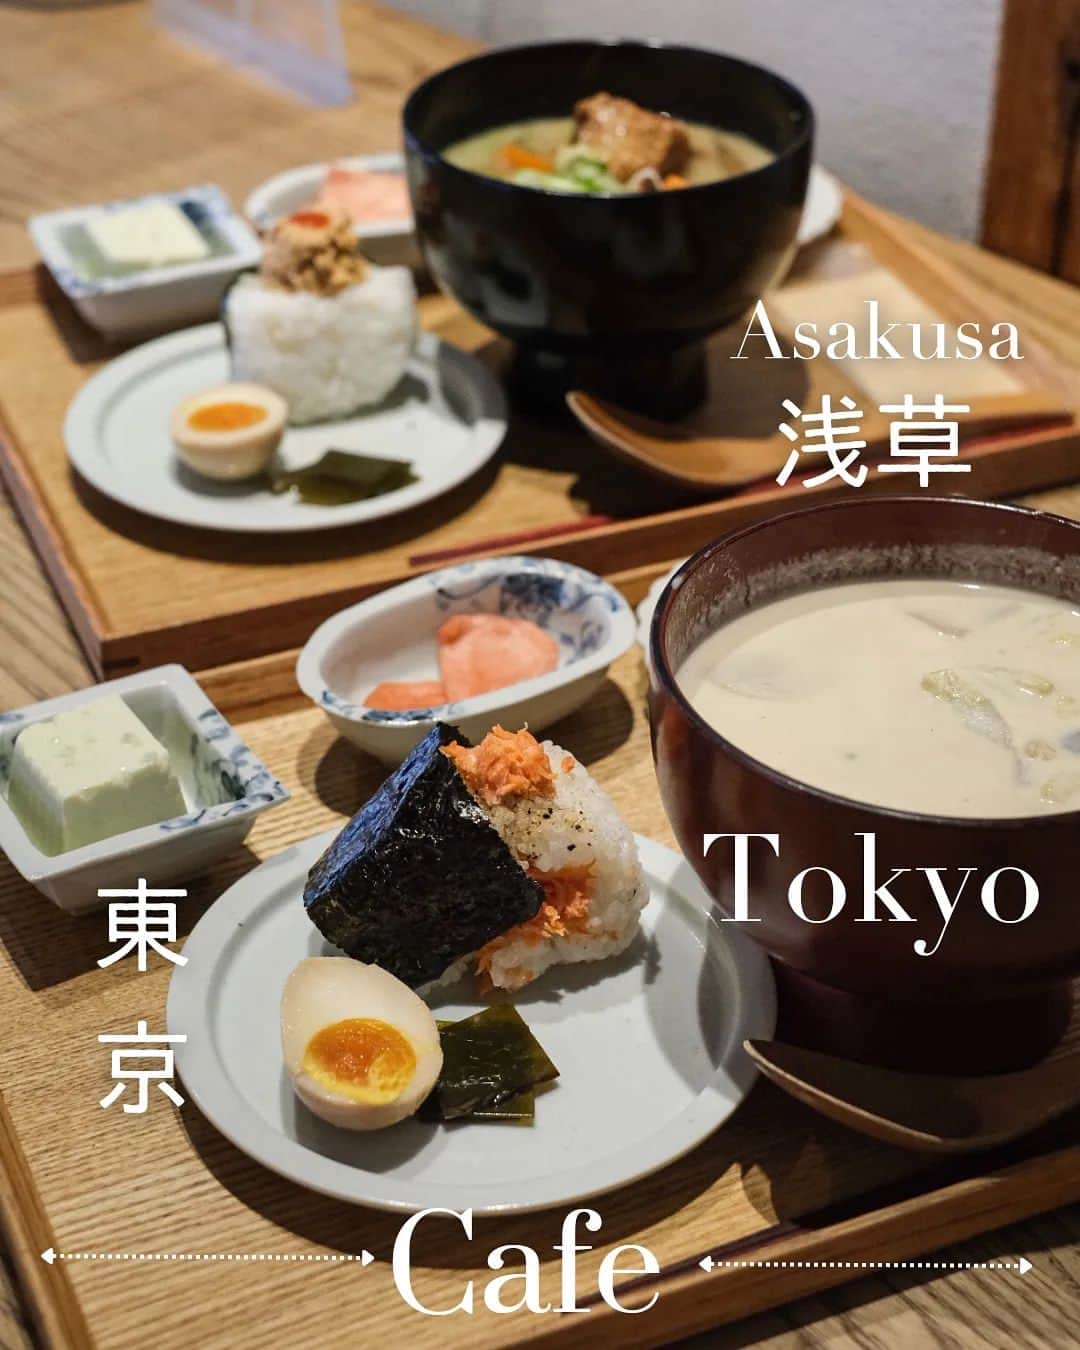 Erinaのインスタグラム：「This place is beyond adorable, serving a delightful Onigiri + Miso Soup set🍱  We ordered the -Tonjiru set  -Soy Milk Miso soup.   Both soups were packed with an abundance of seasonal veggies and came with a charming assortment of side dishes to enhance the experience.  The flavors were perfectly balanced, evoking a sense of nostalgic bliss.  What makes this place even more wonderful is their early opening time! Unlike most cafes and restaurants (excluding chain establishments), which typically open at 11 am, this gem welcomes early risers with open arms.  _____________________ Addresa: 1 Chome-7-5 Asakusa, Taito City, Tokyo 111-0032, Japan  Trading hours: 9am -3 pm _____________________」